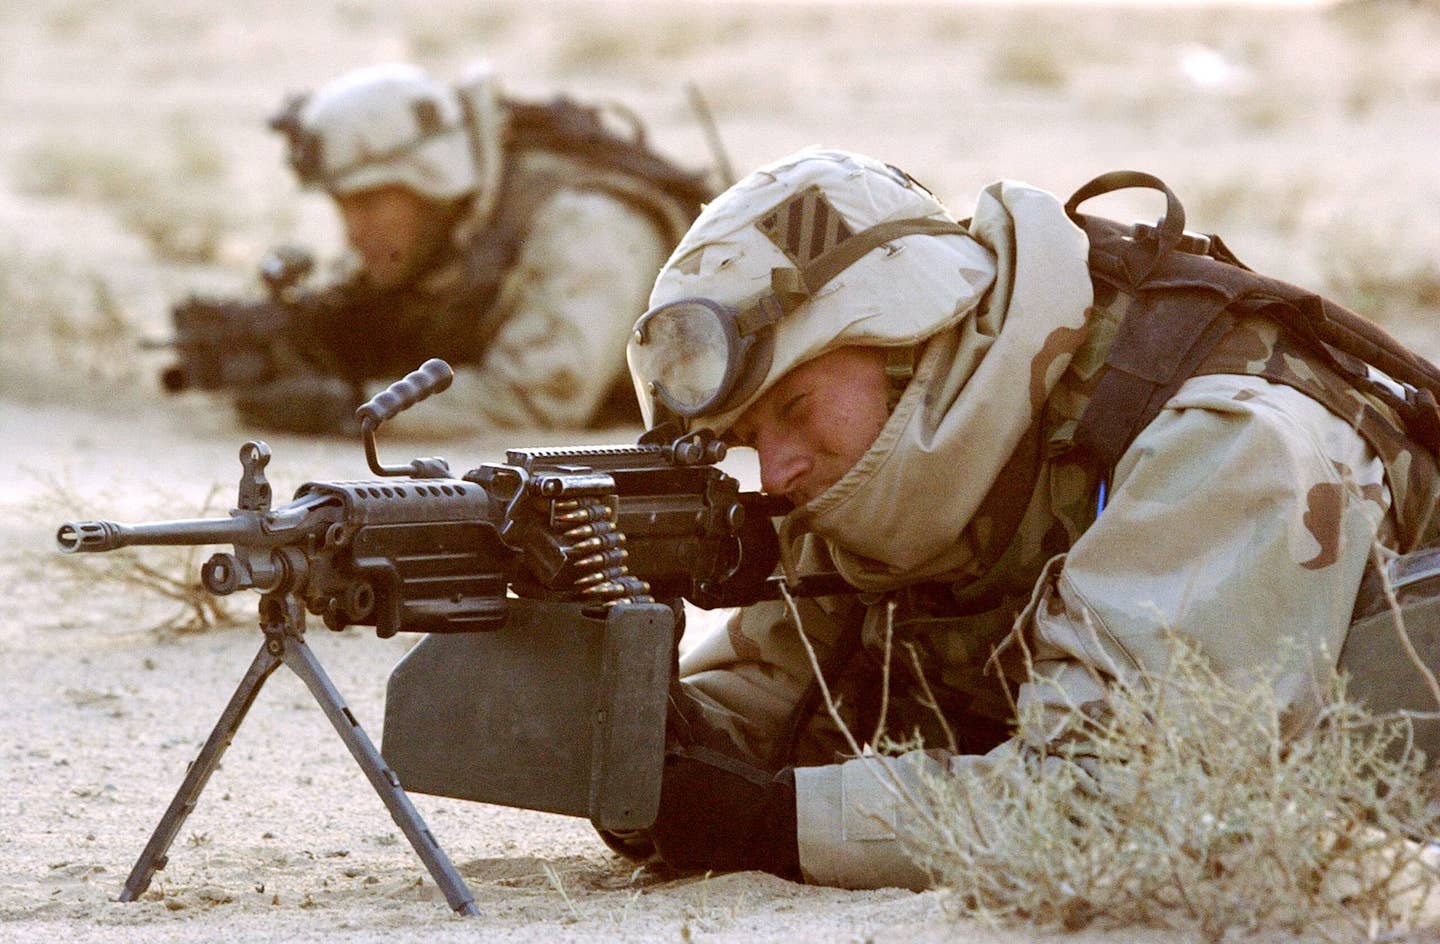 A platoon from the U.S. Army 3rd Division man a frontline position near the Iraqi city of Karbala, March 29, 2003, during the push northward toward Baghdad. <em>Photo by Scott Nelson/Getty Images</em>